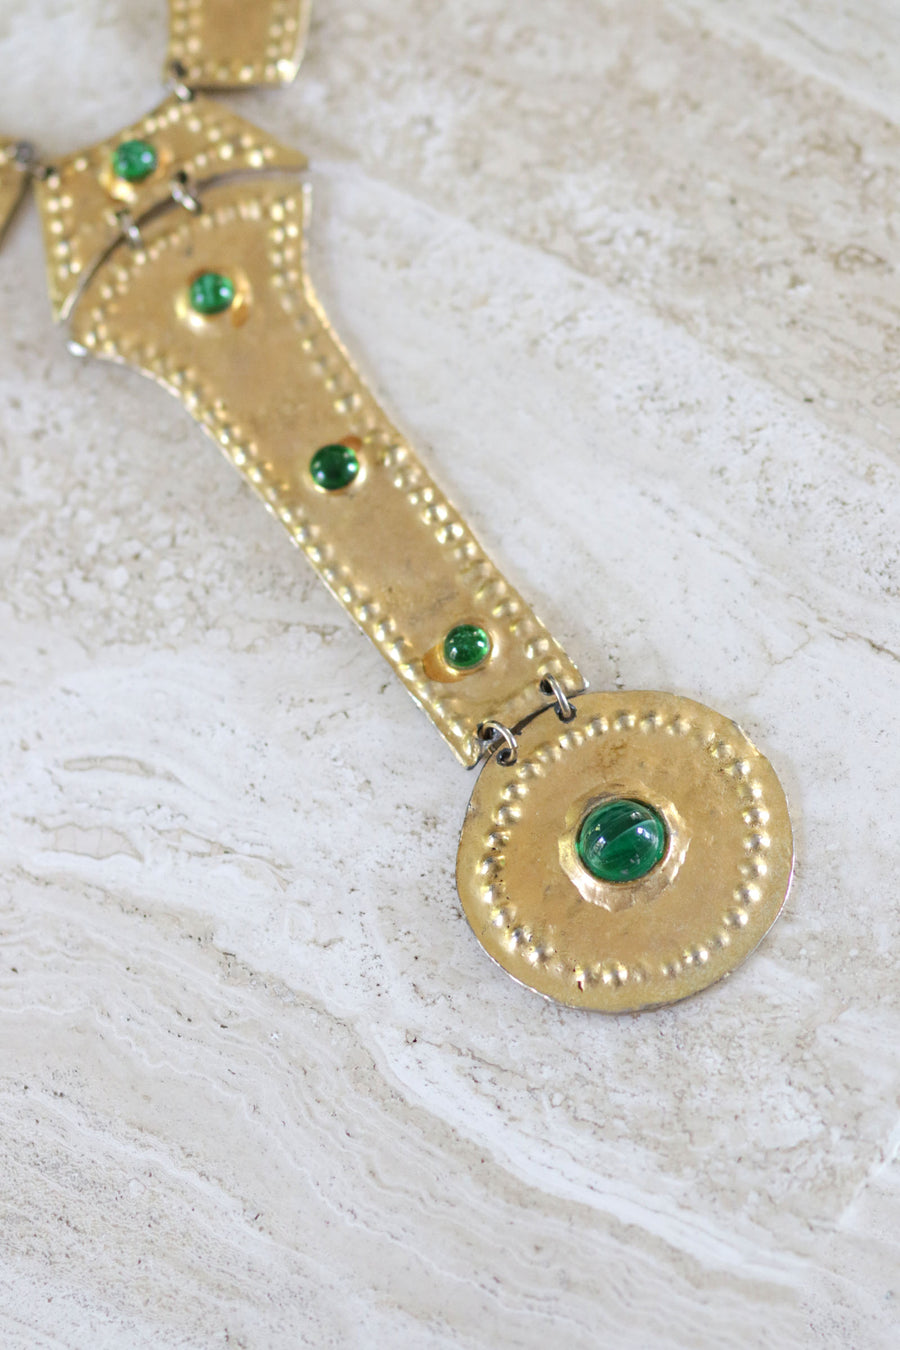 JH Vintage : Gold Necklace with Faux Emerald Stone Inlay